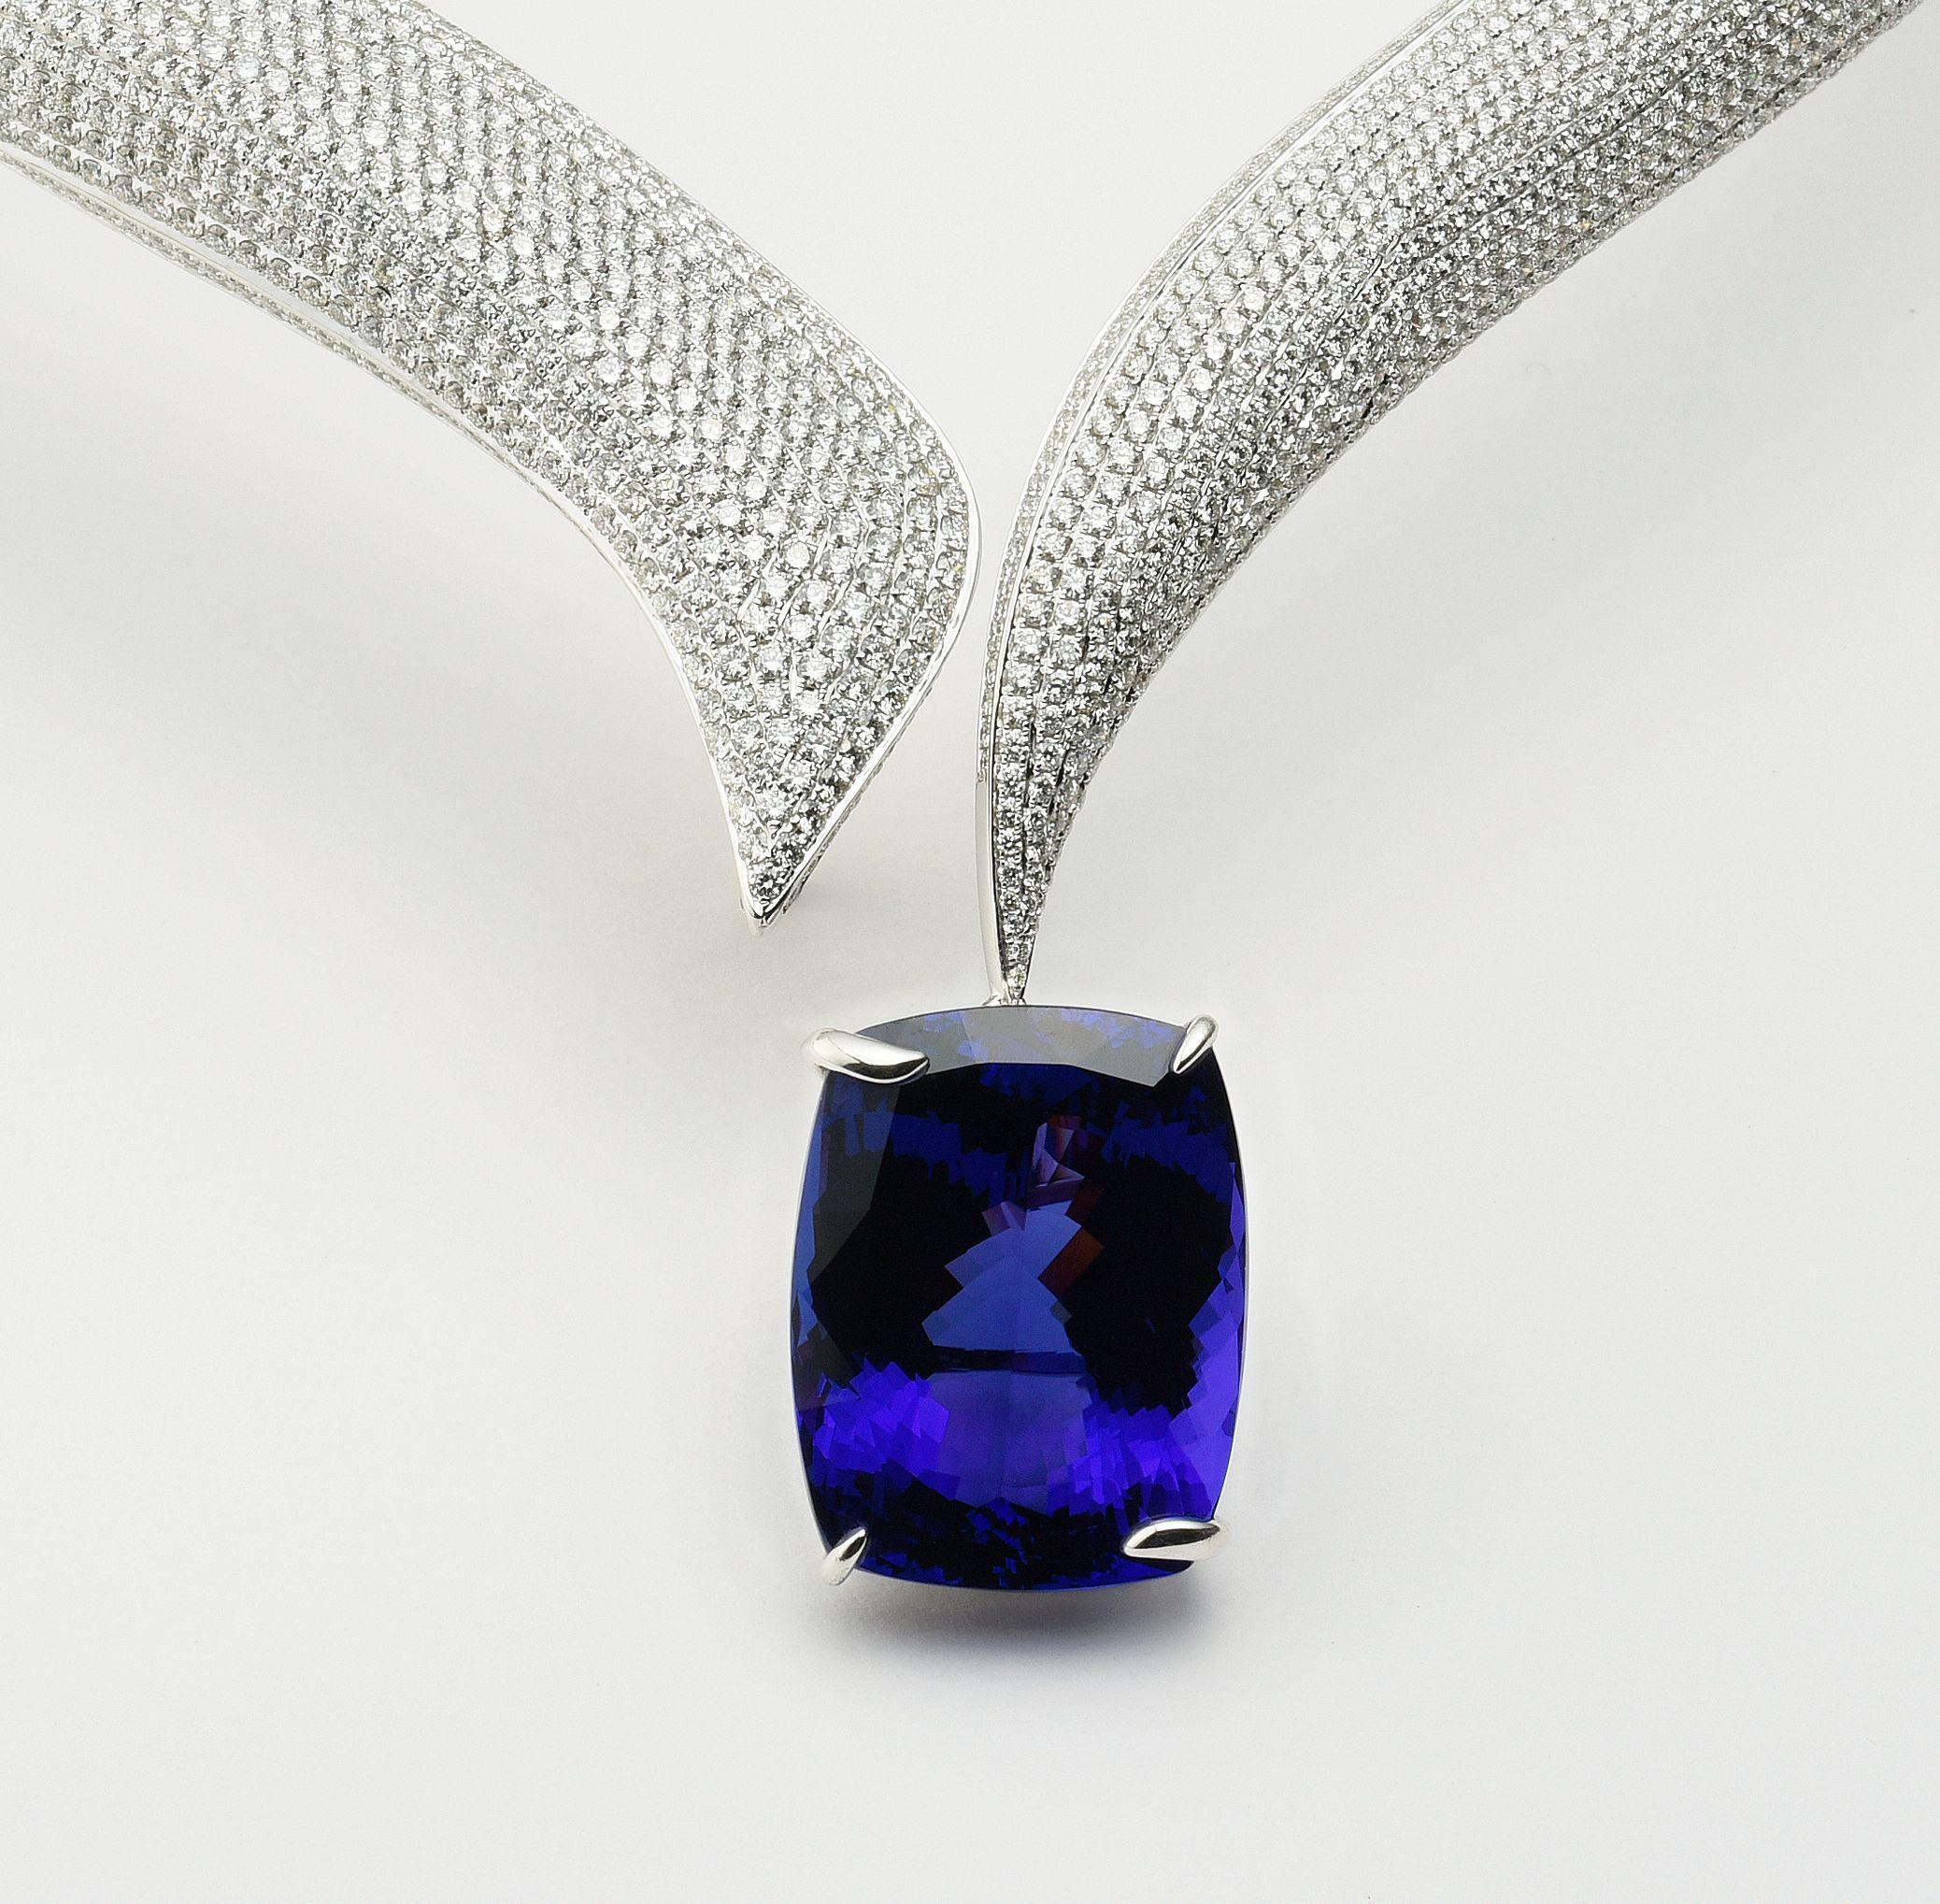 Tanzanite is one of the rarest gemstones on earth and one of the most undervalued relative to its rarity.  
This rare 70.88 Carats Natural Tanzanite with 70.02 carats diamond necklace is one of a kind that we offer.